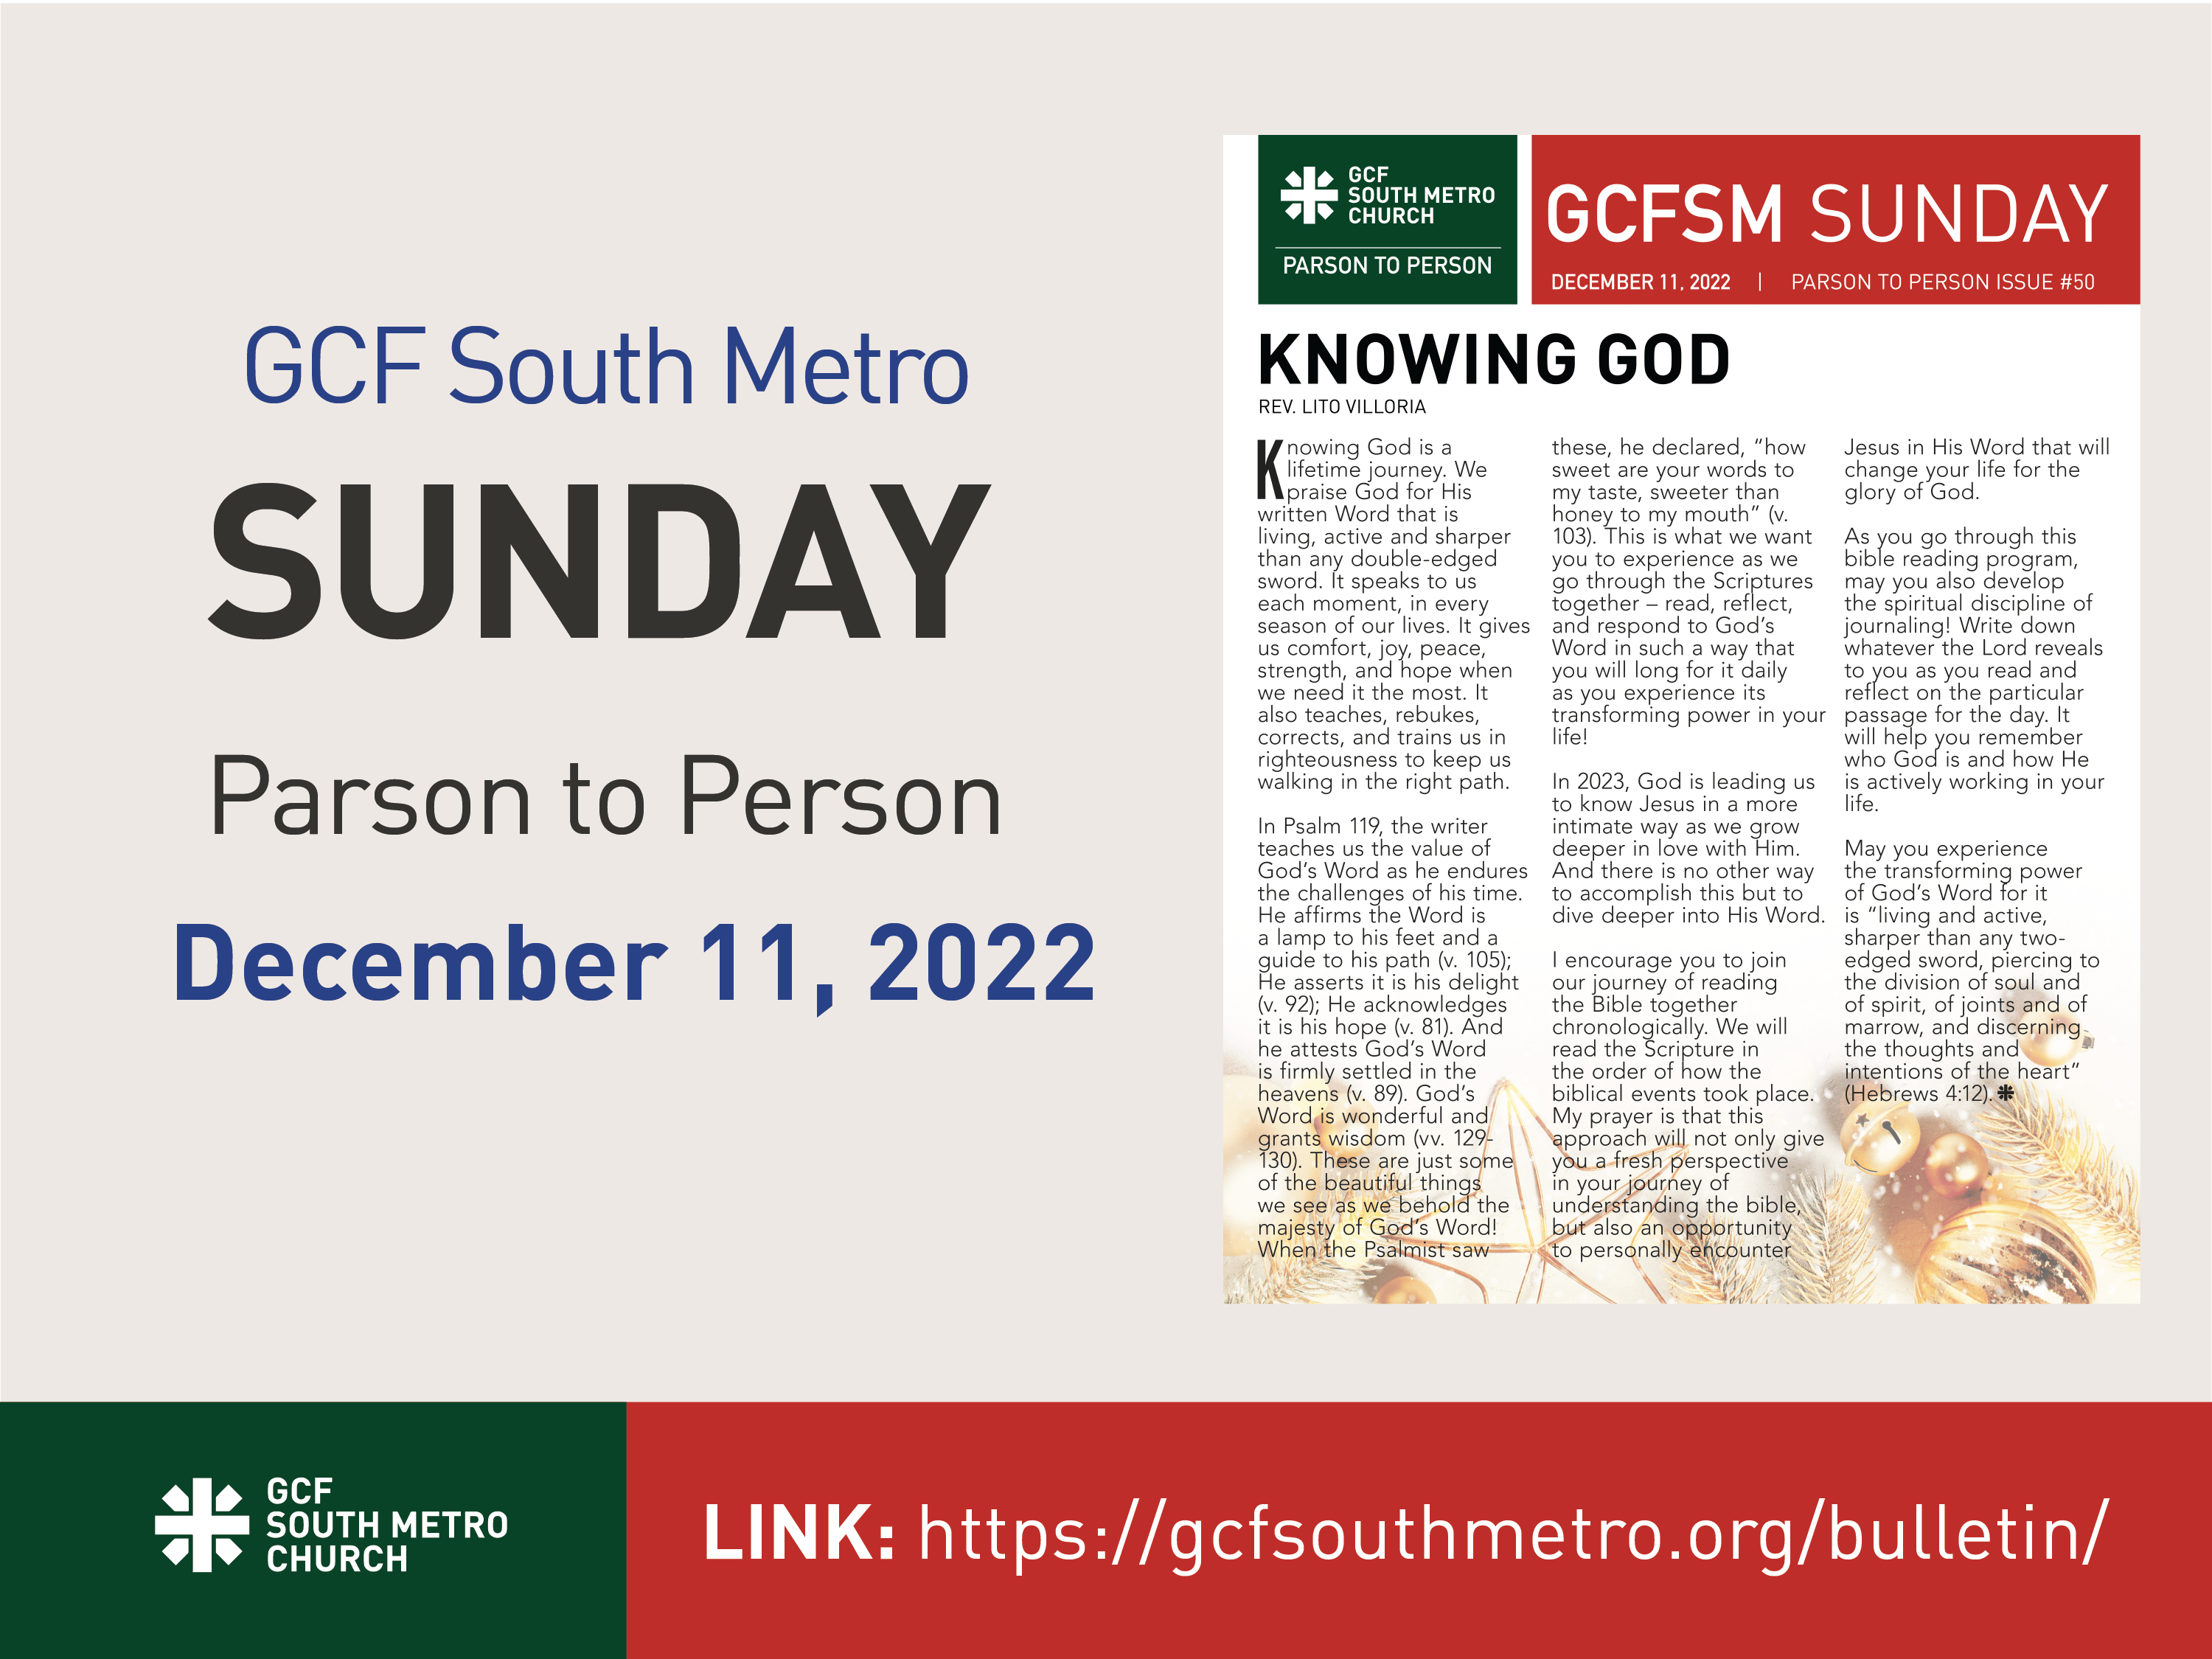 Sunday Bulletin – Parson to Person, December 11, 2022